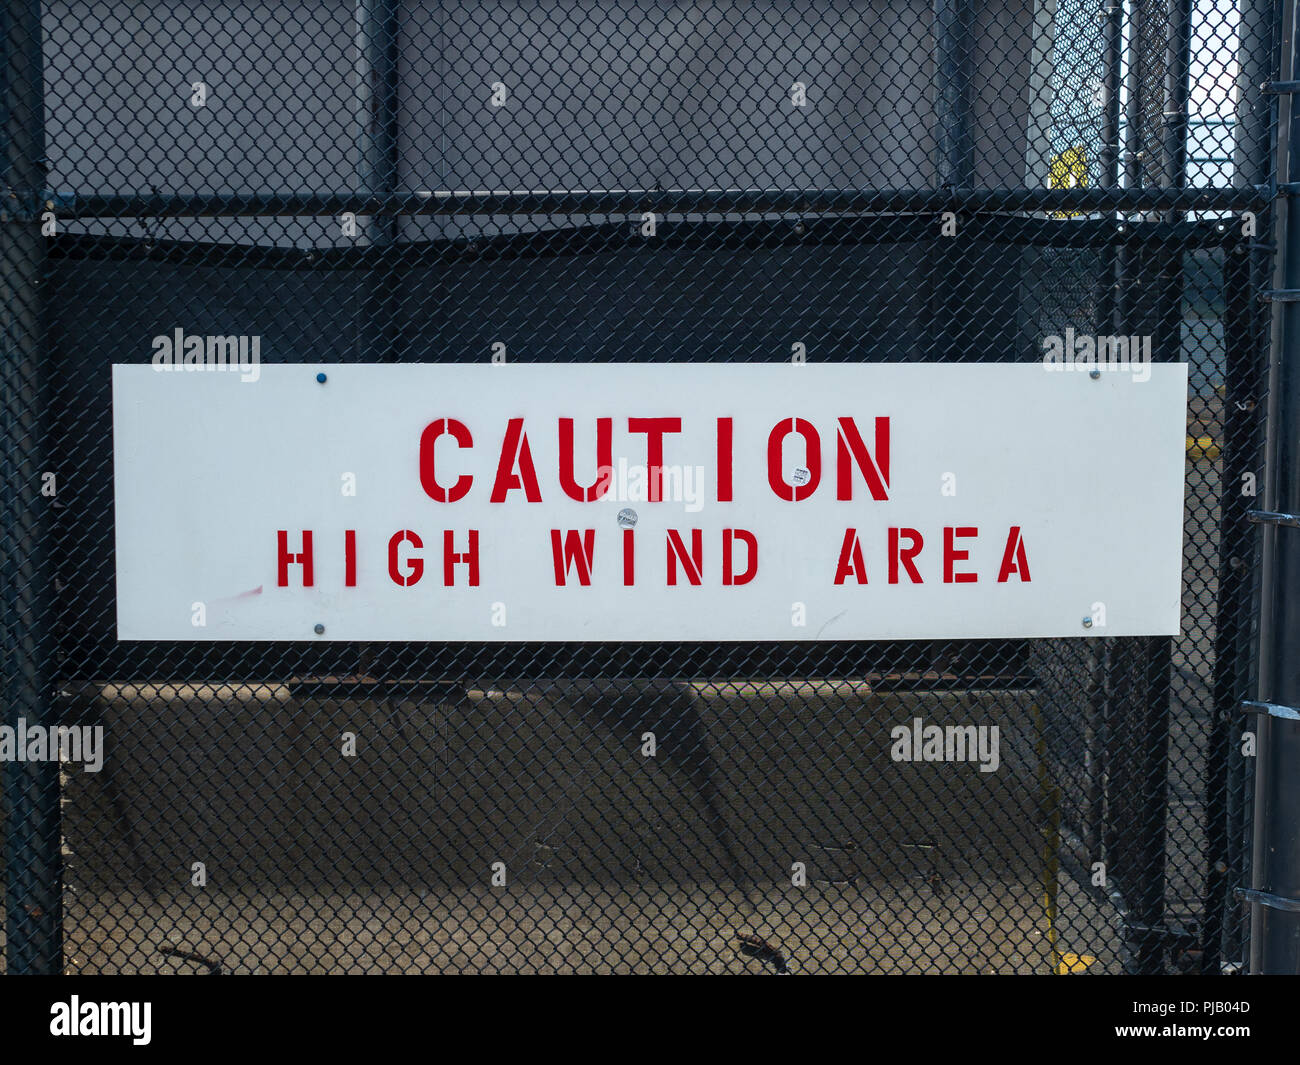 Caution high wind area sign handing on black fence  Stock Photo